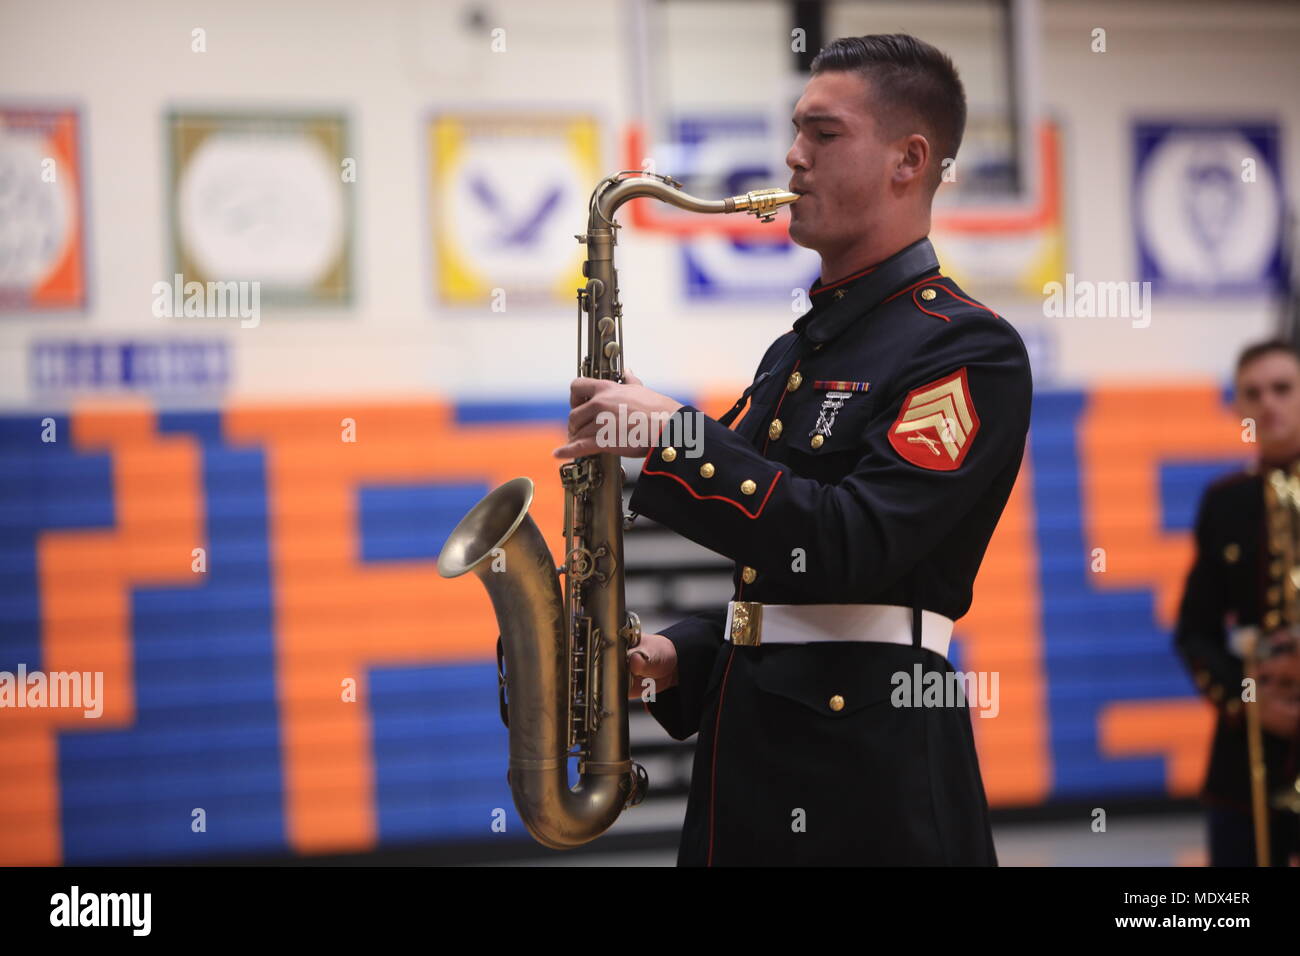 Sergeant Spencer Day plays the saxophone at Valley Park High School, Dec. 14, in Valley Park, Missouri. Marines with the Marine Corps New Orleans Band entertain students and teachers at various high schools in and around the St. Louis area Dec. 12-14 during its winter recruiting tour. Aside from playing music, the New Orleans, Louisiana-based Marines also educated and informed students and teachers about what life is like being a band Marine. (Official U.S. Marine Corps photo by GySgt. Bryan A. Peterson/Released) Stock Photo